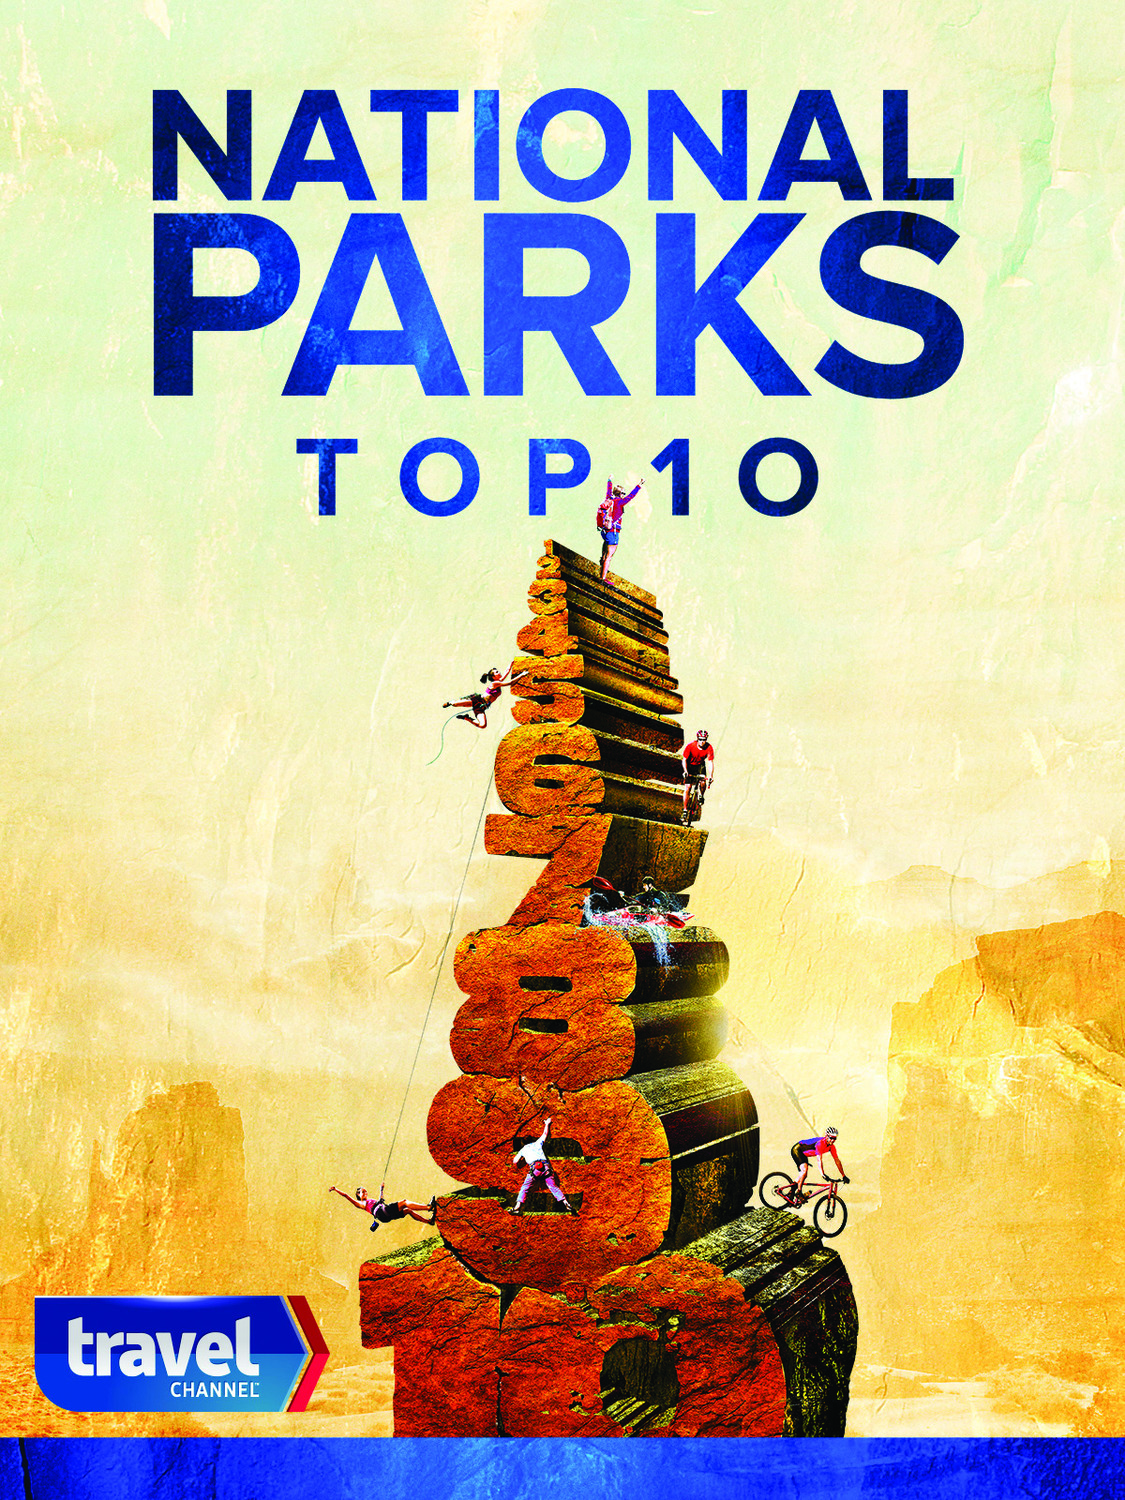 Extra Large TV Poster Image for National Parks Top 10 